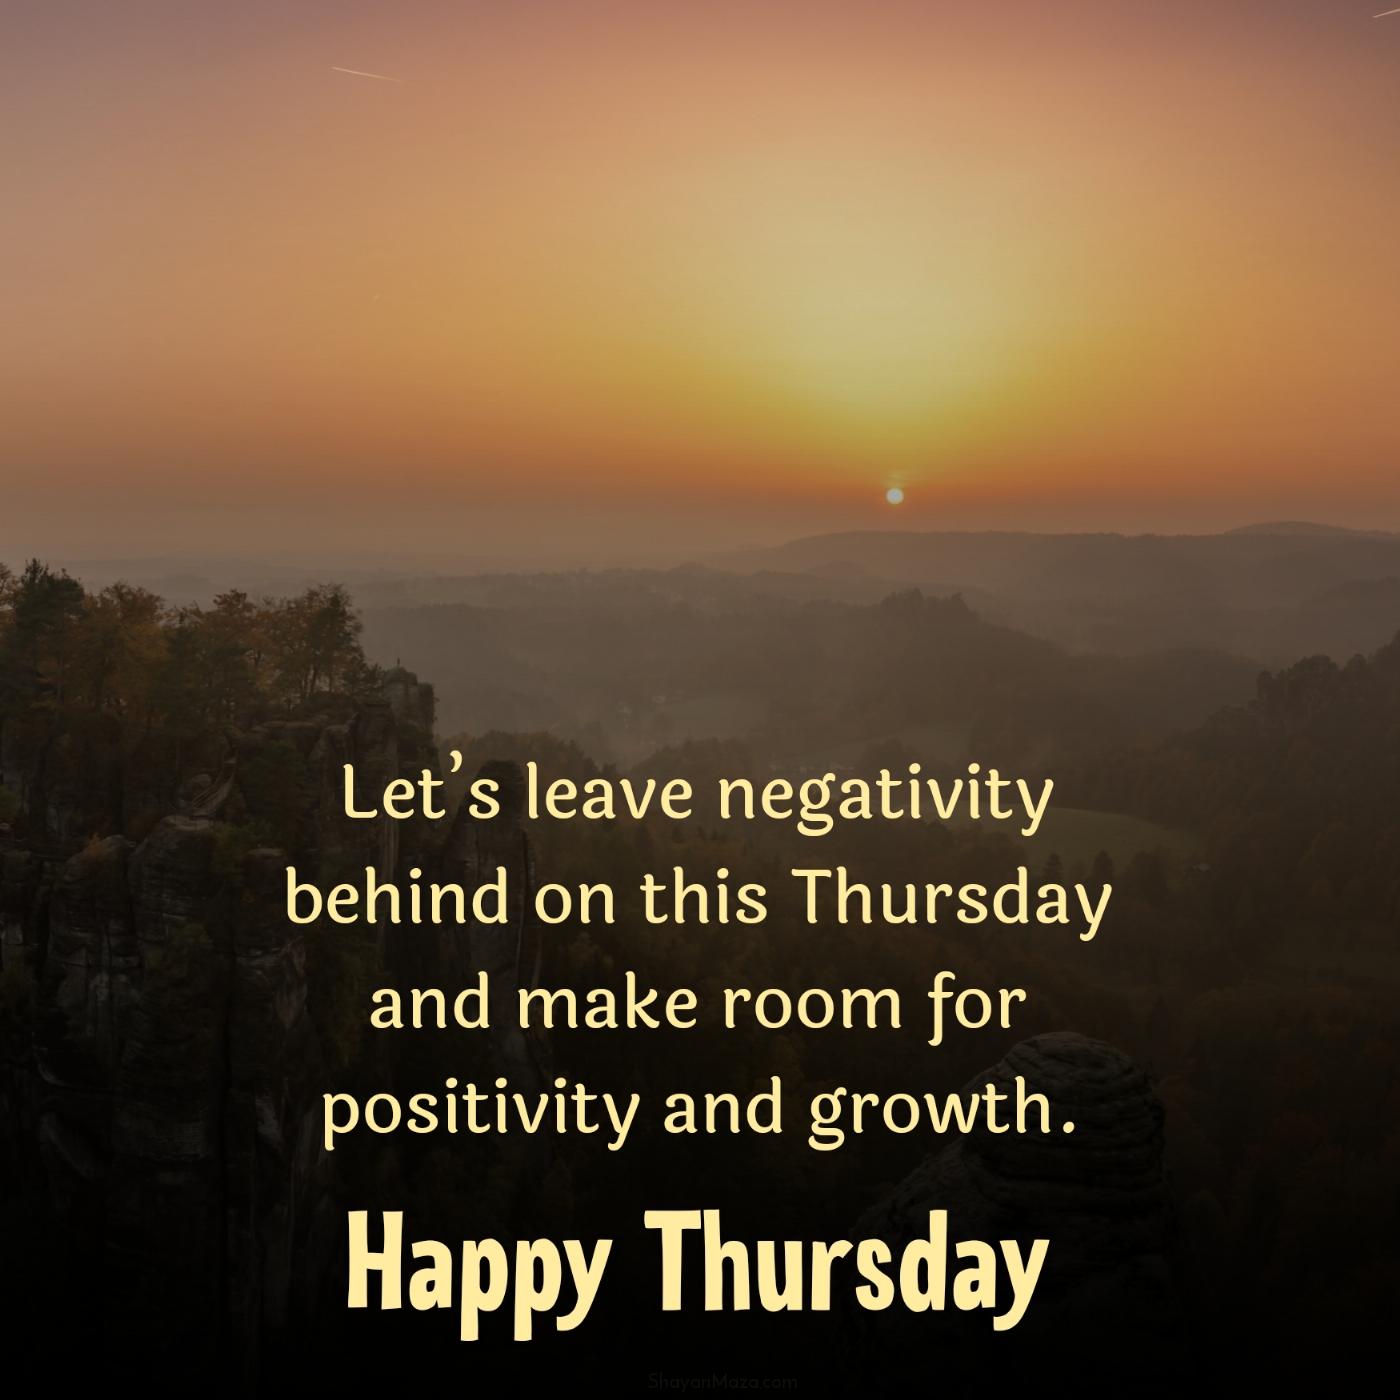 Lets leave negativity behind on this Thursday